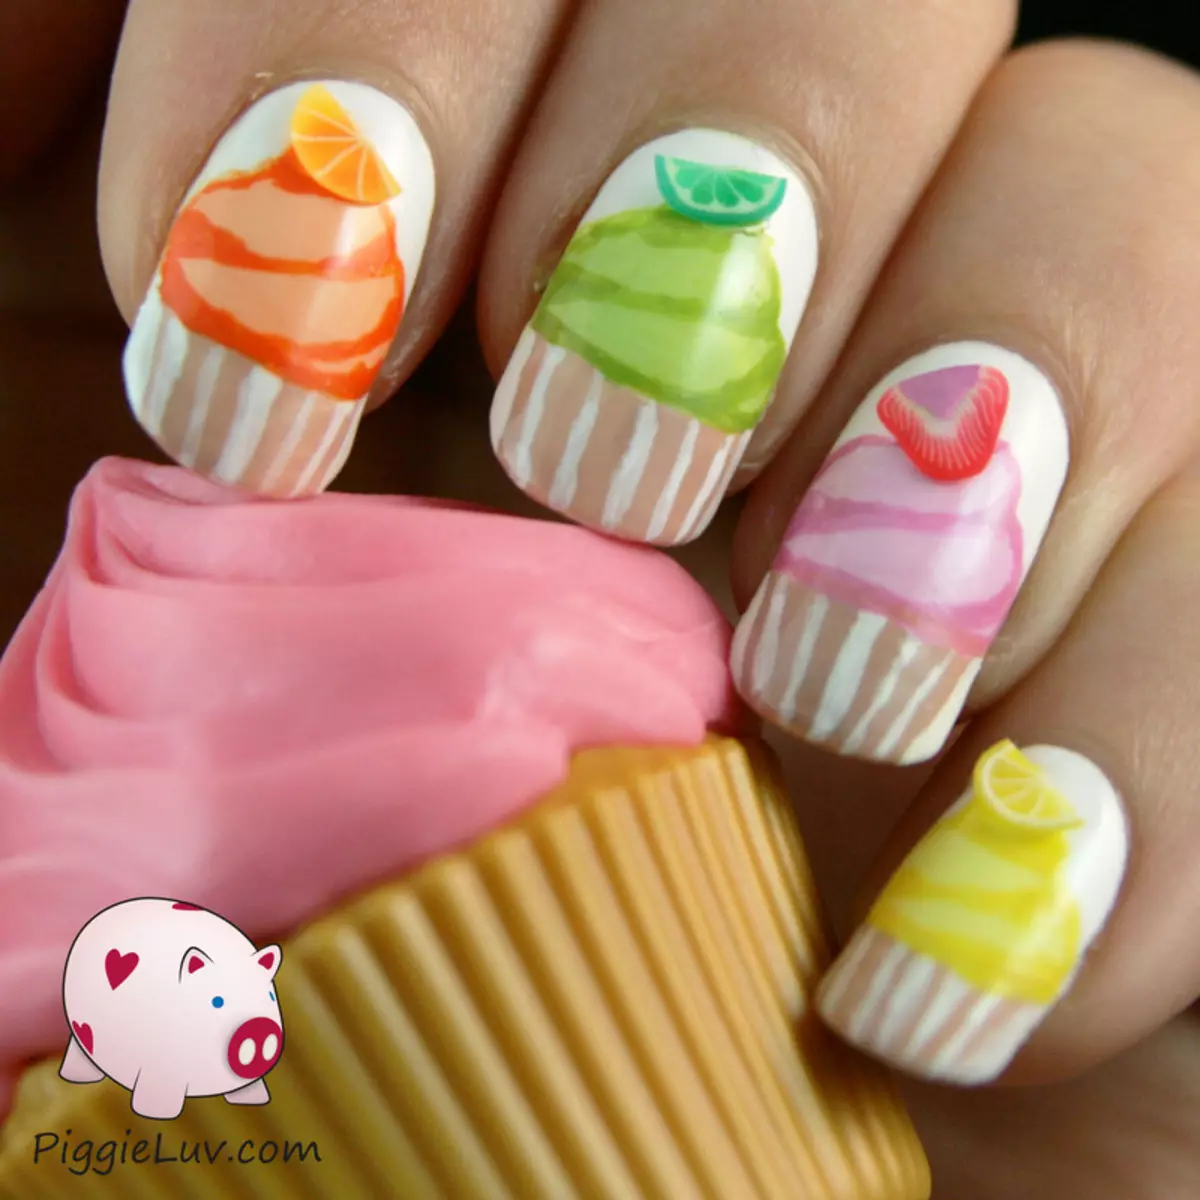 Manicure with sweets (40 photos): nail design ideas with donkeys, cakes, caramel and candy 6523_20